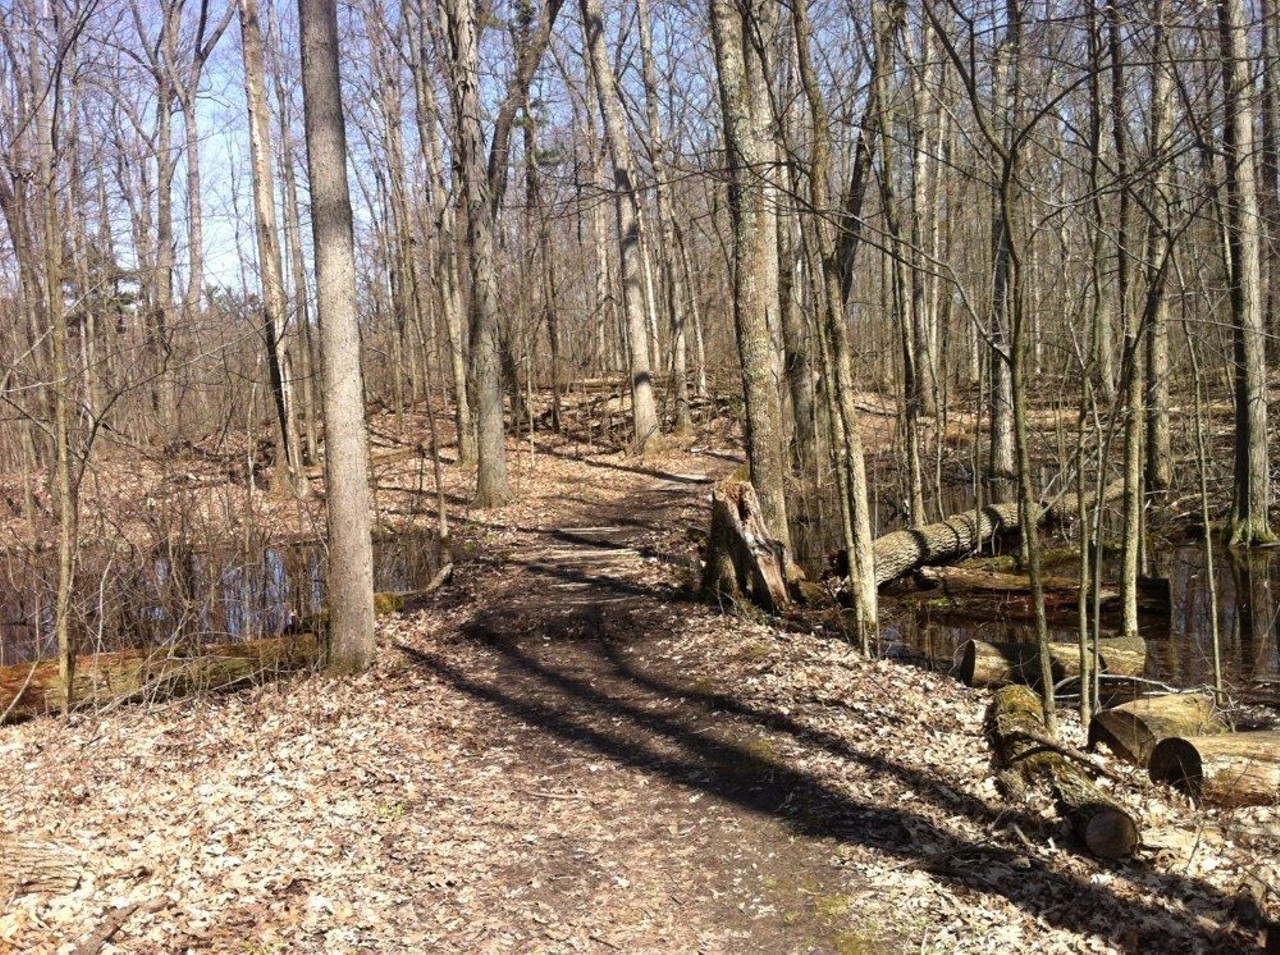 Graham Lakes Trail
Lake Orion
Also known as the Orange Loop, this trail goes on for 3.6 miles. This trail is the biggest out of the Bald Mountain Recreation Area&#146;s trails. Hikers can expect to see six lakes and trek over many hills and ridges, one of the highest points reaching 60 feet. 
Photo via Alltrails user kevin coppock